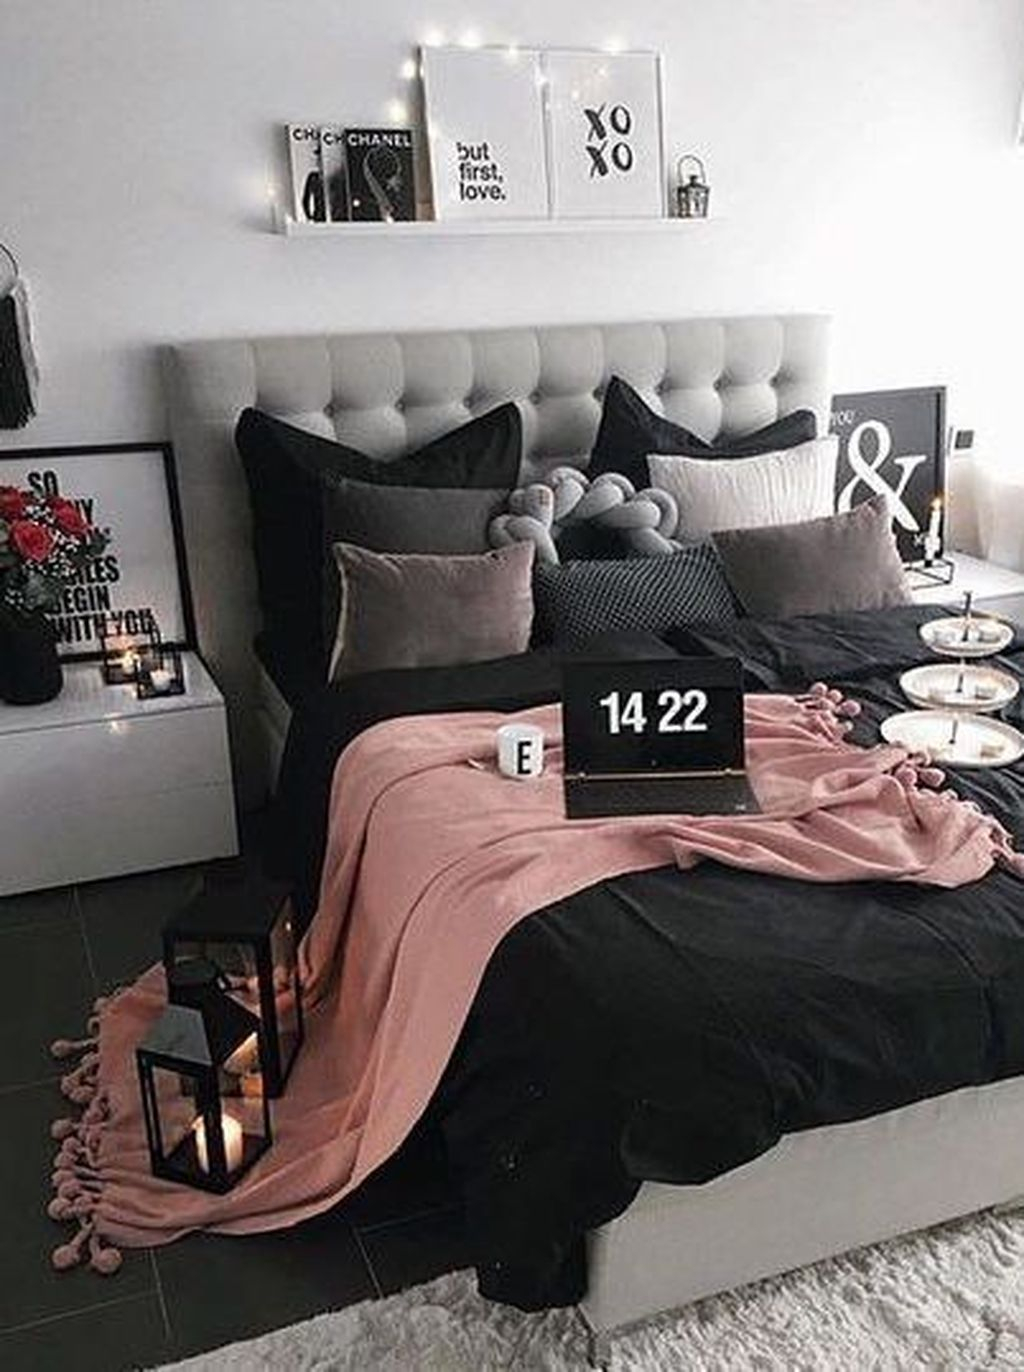 Admiring Bedroom Decor Ideas To Have Right Now 12